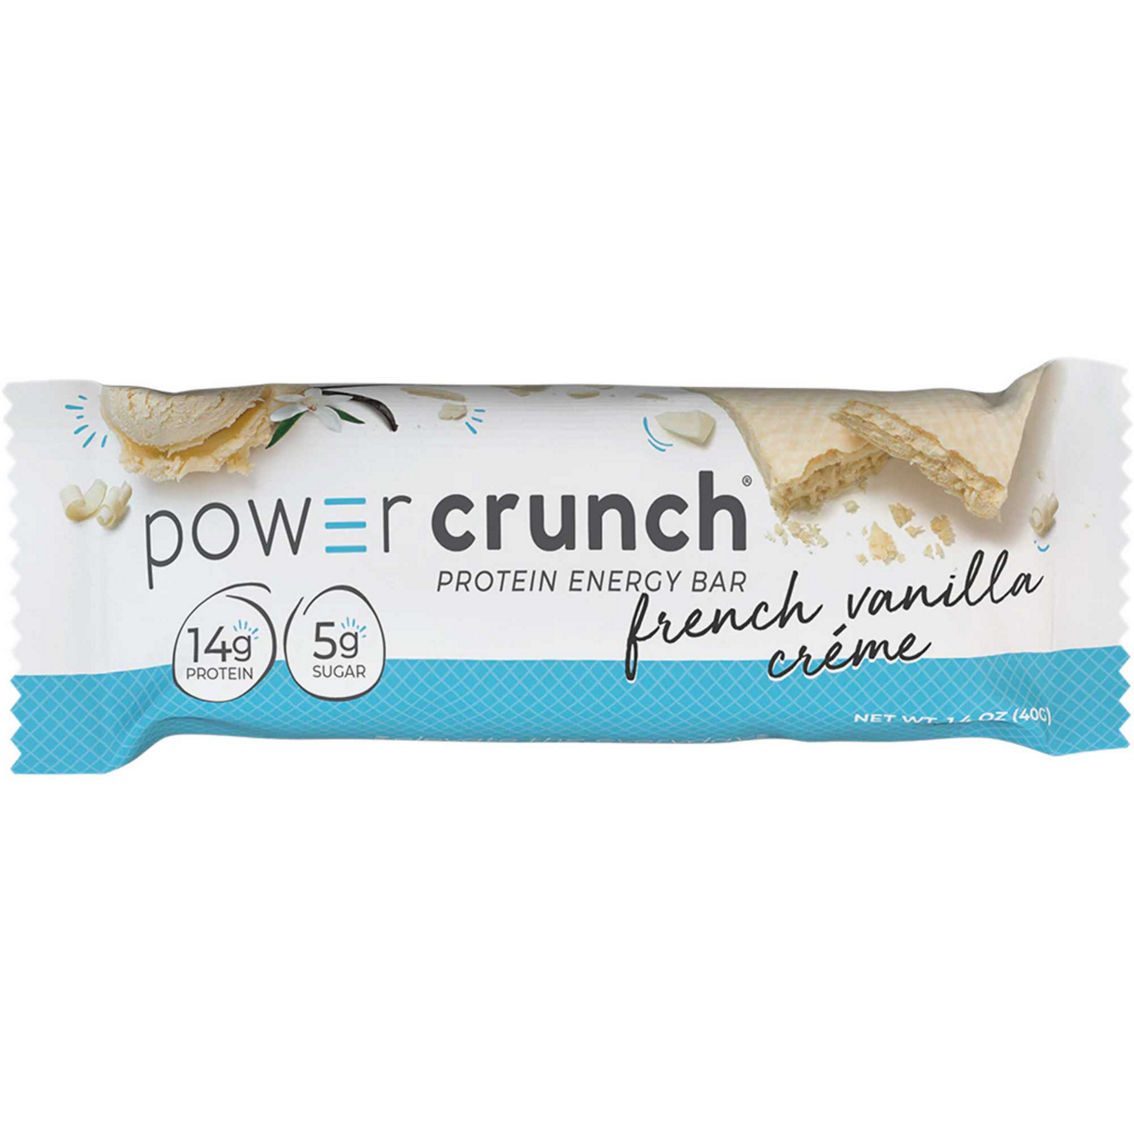 Power Crunch Protein Energy Bar 12 pk. - Image 2 of 3